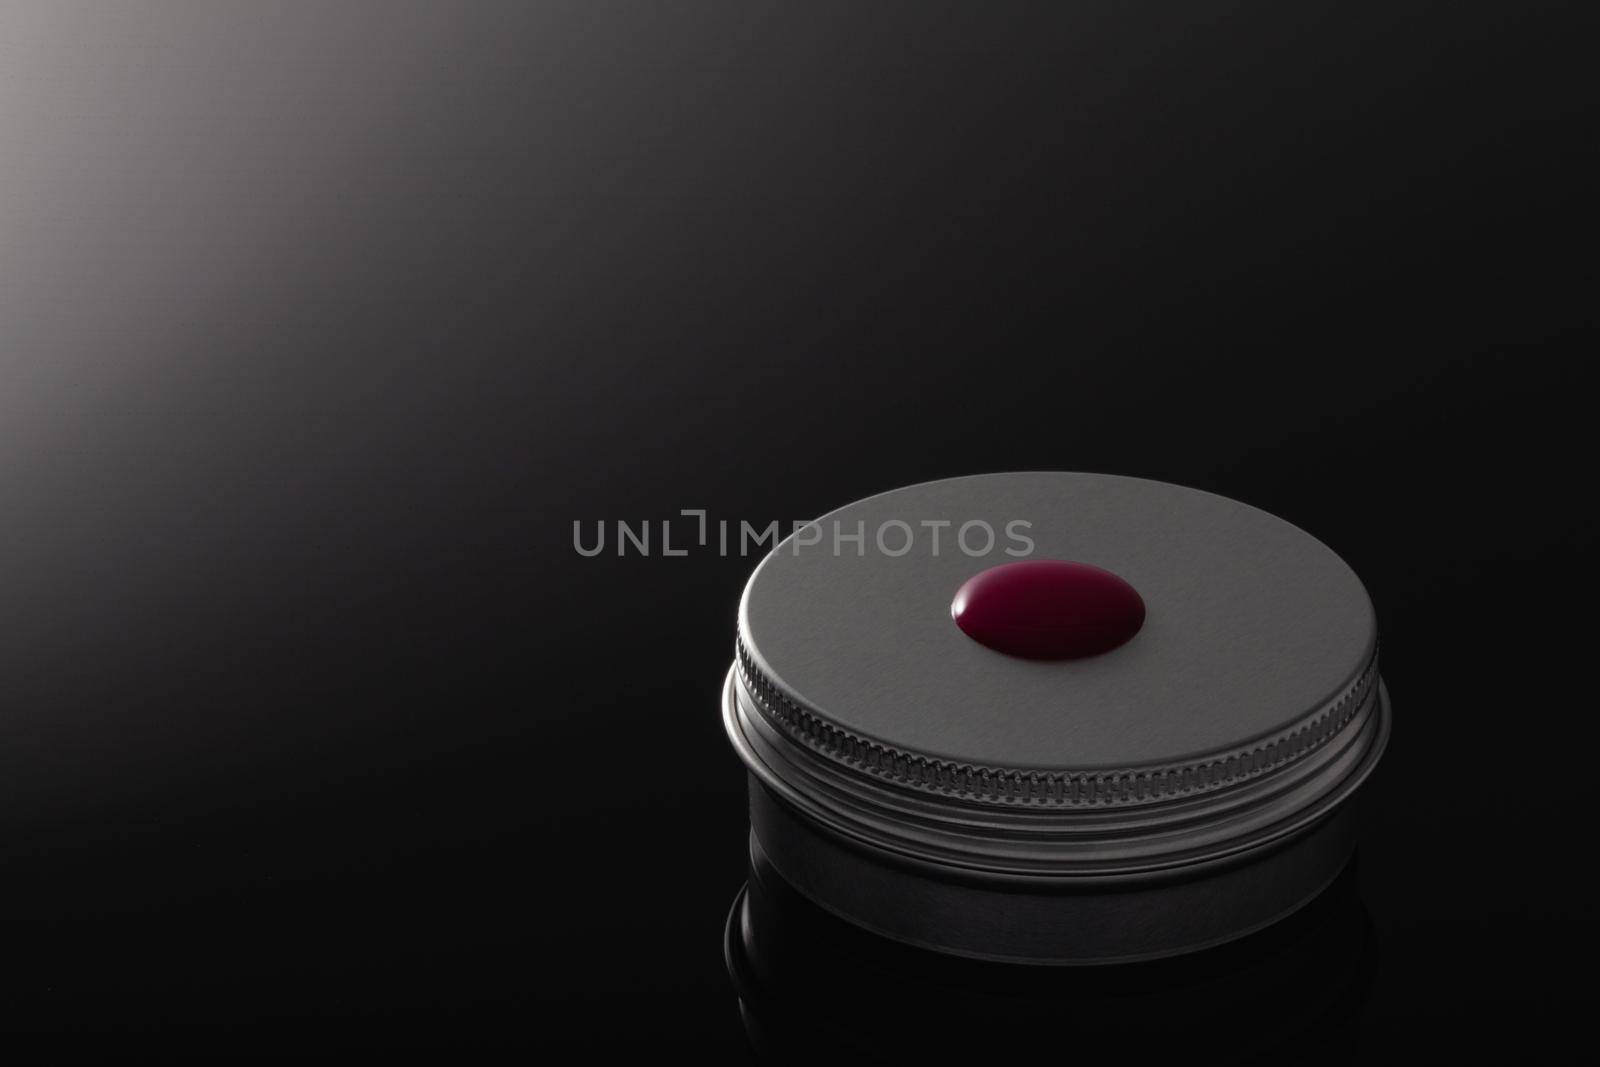 Silver metal containers for cosmetics and a drop of blood isolated on the black glass desk.